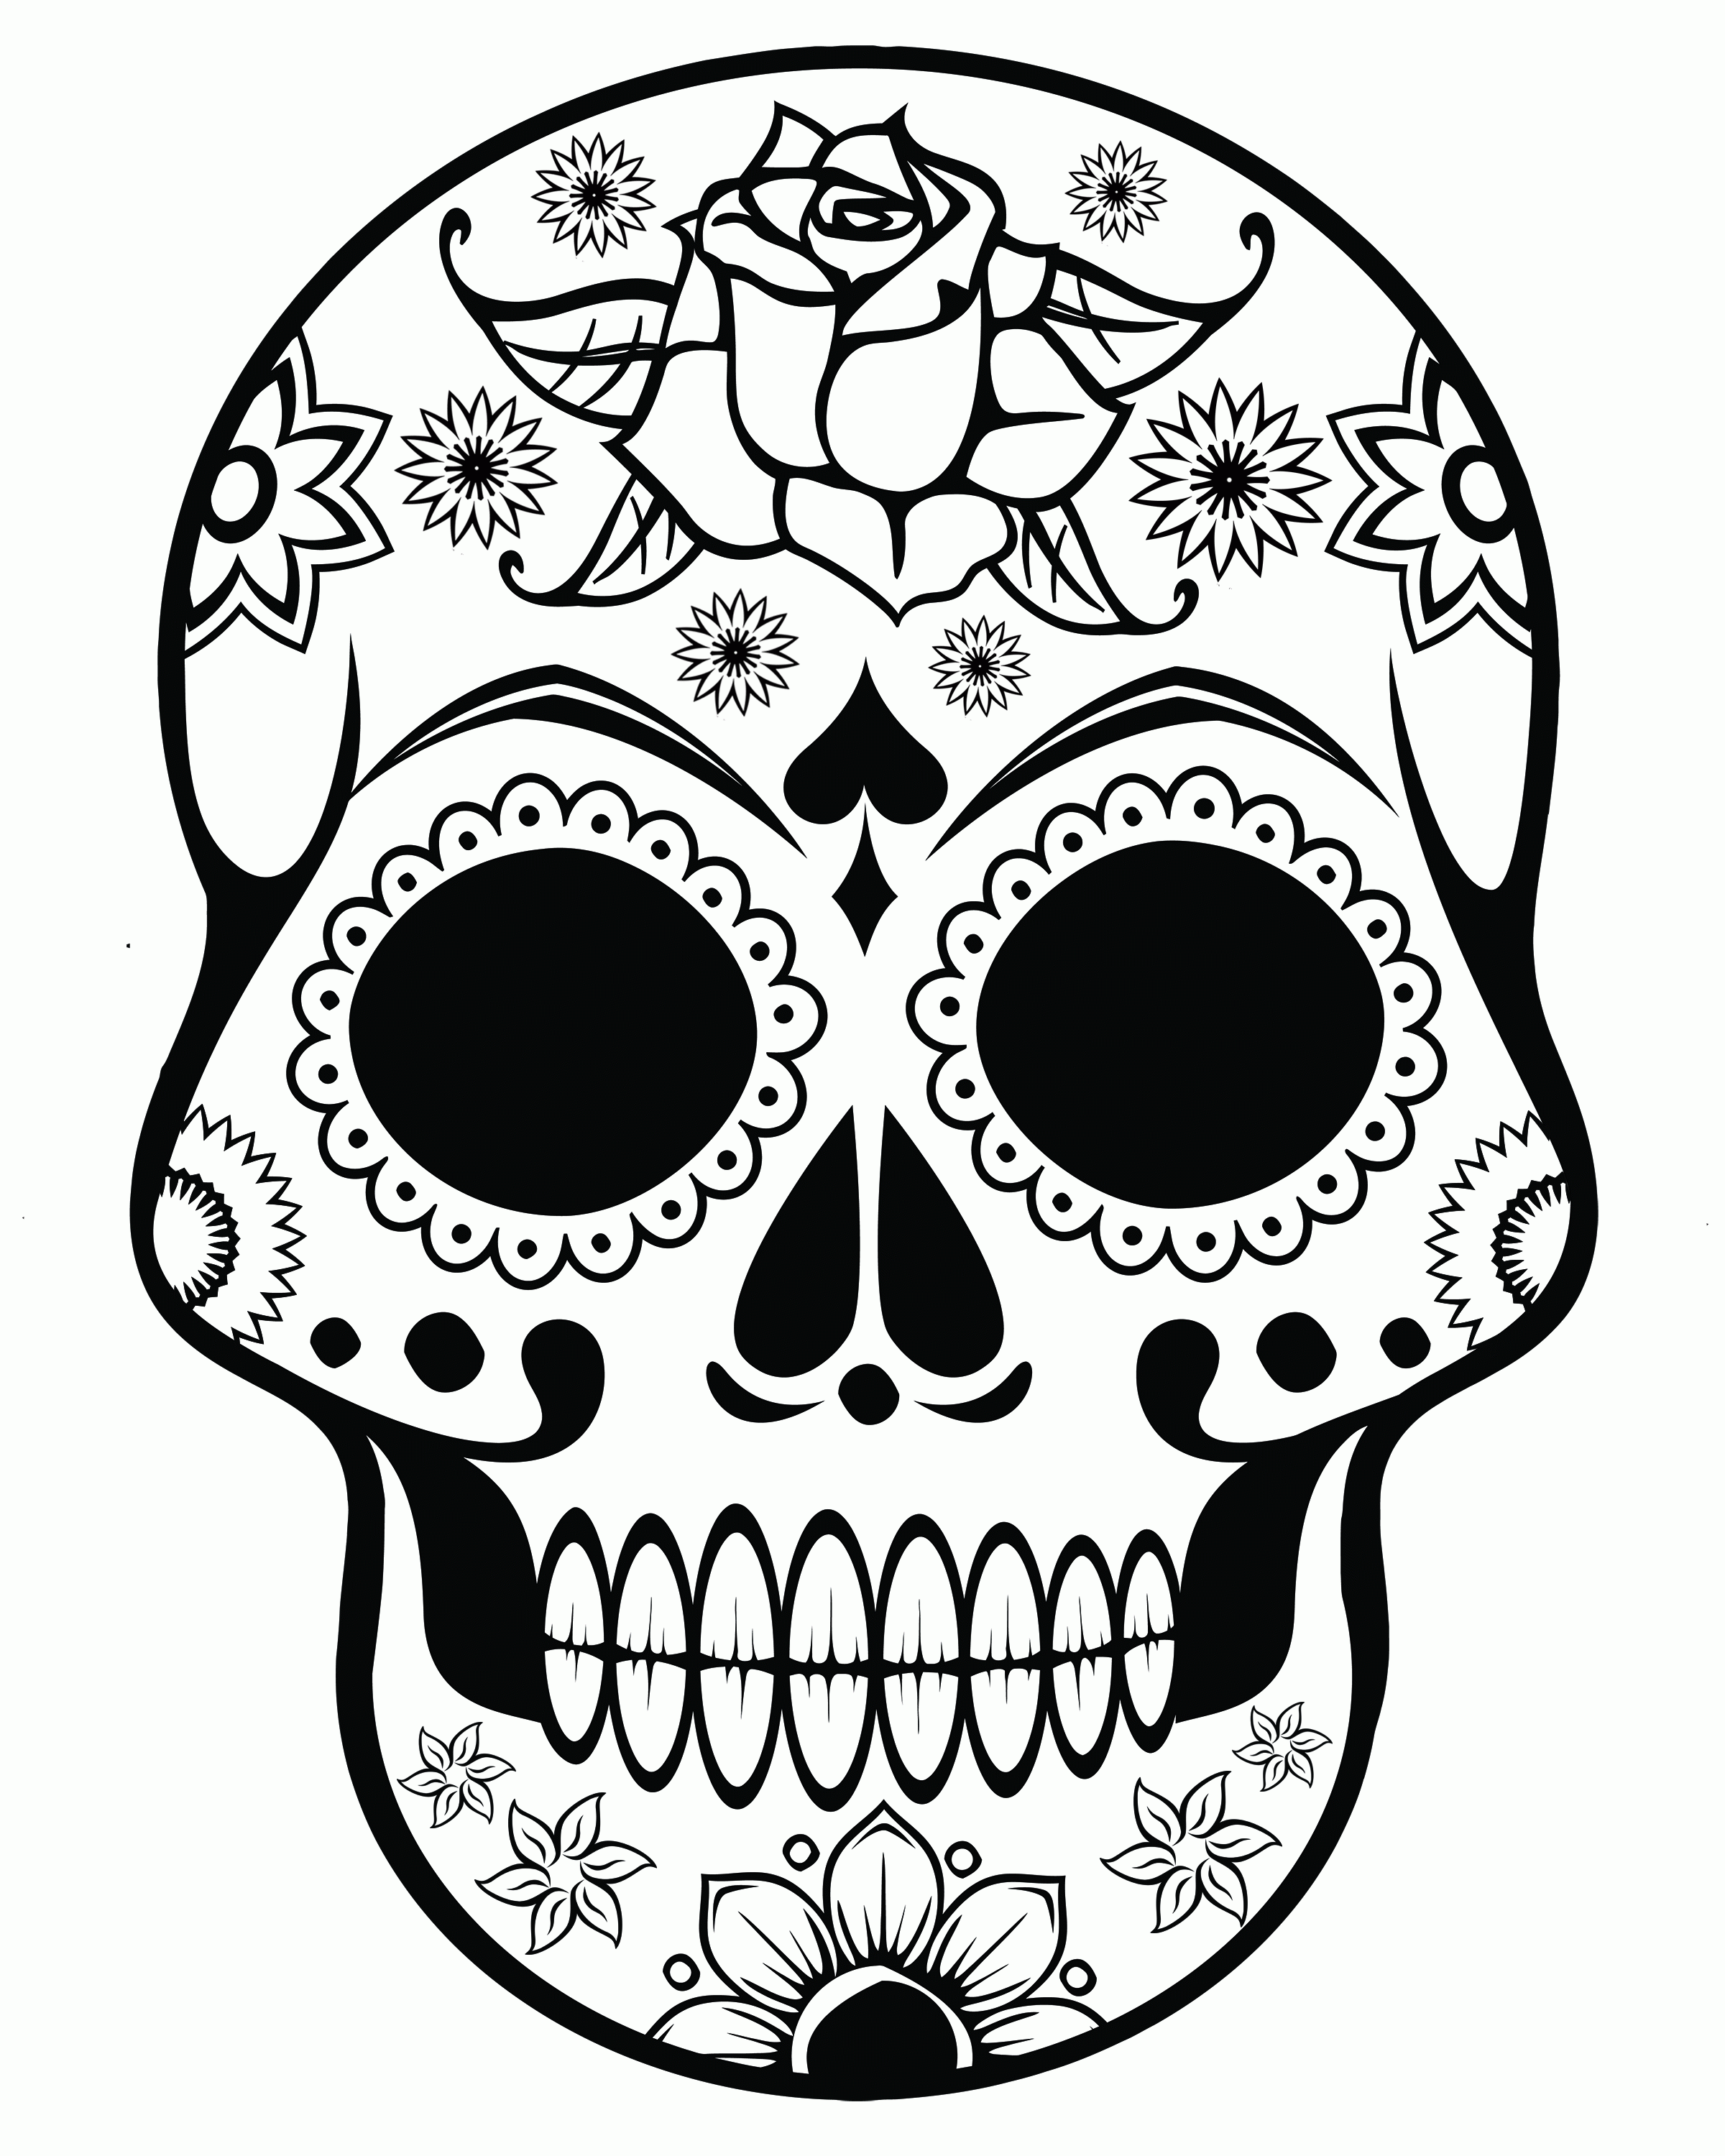 Skull Coloring Pages For Adults - Coloring Home